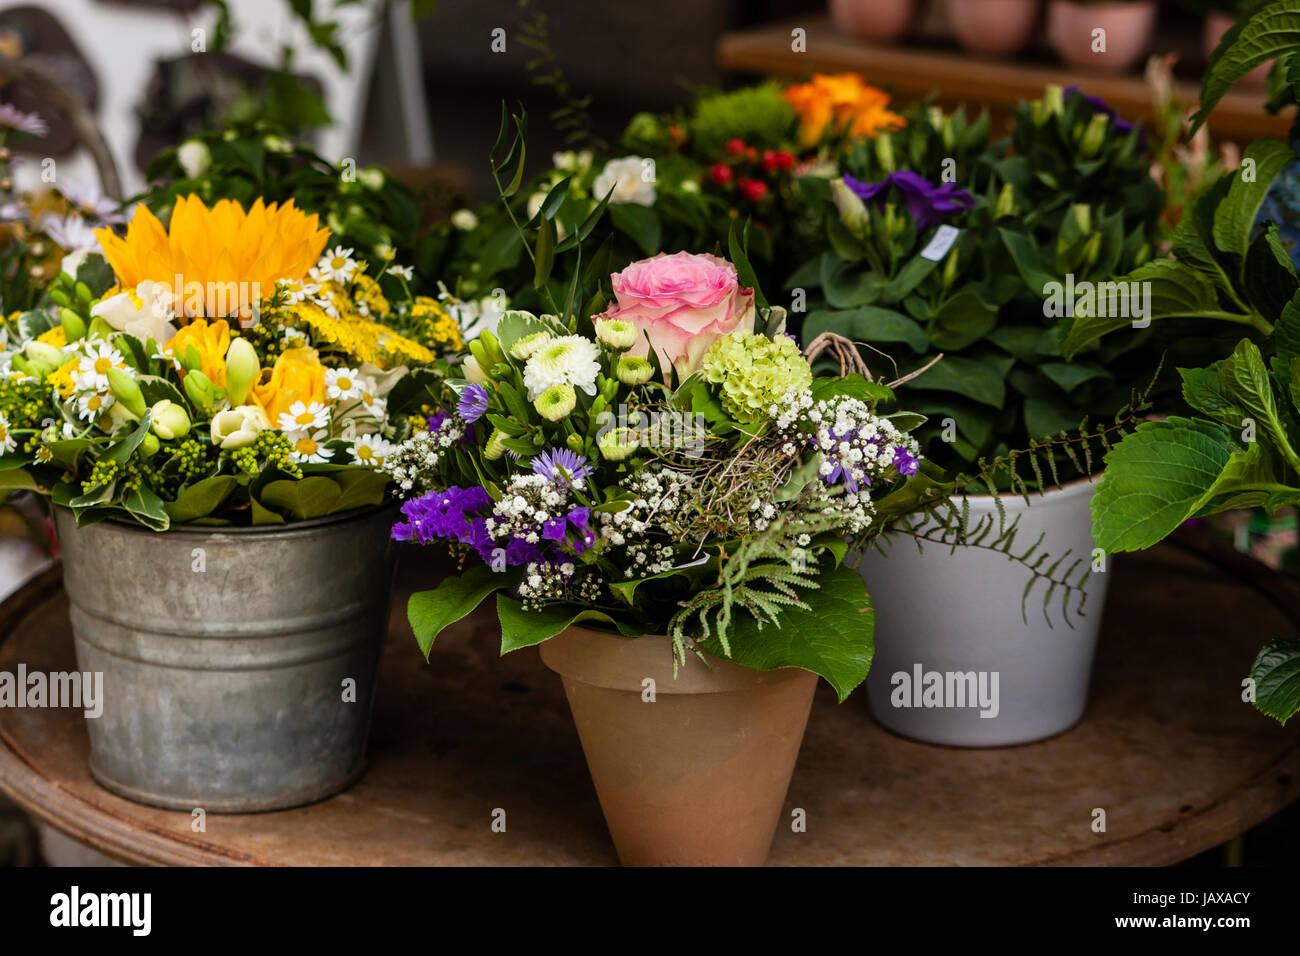 Blumenstand High Resolution Stock Photography and Images - Alamy